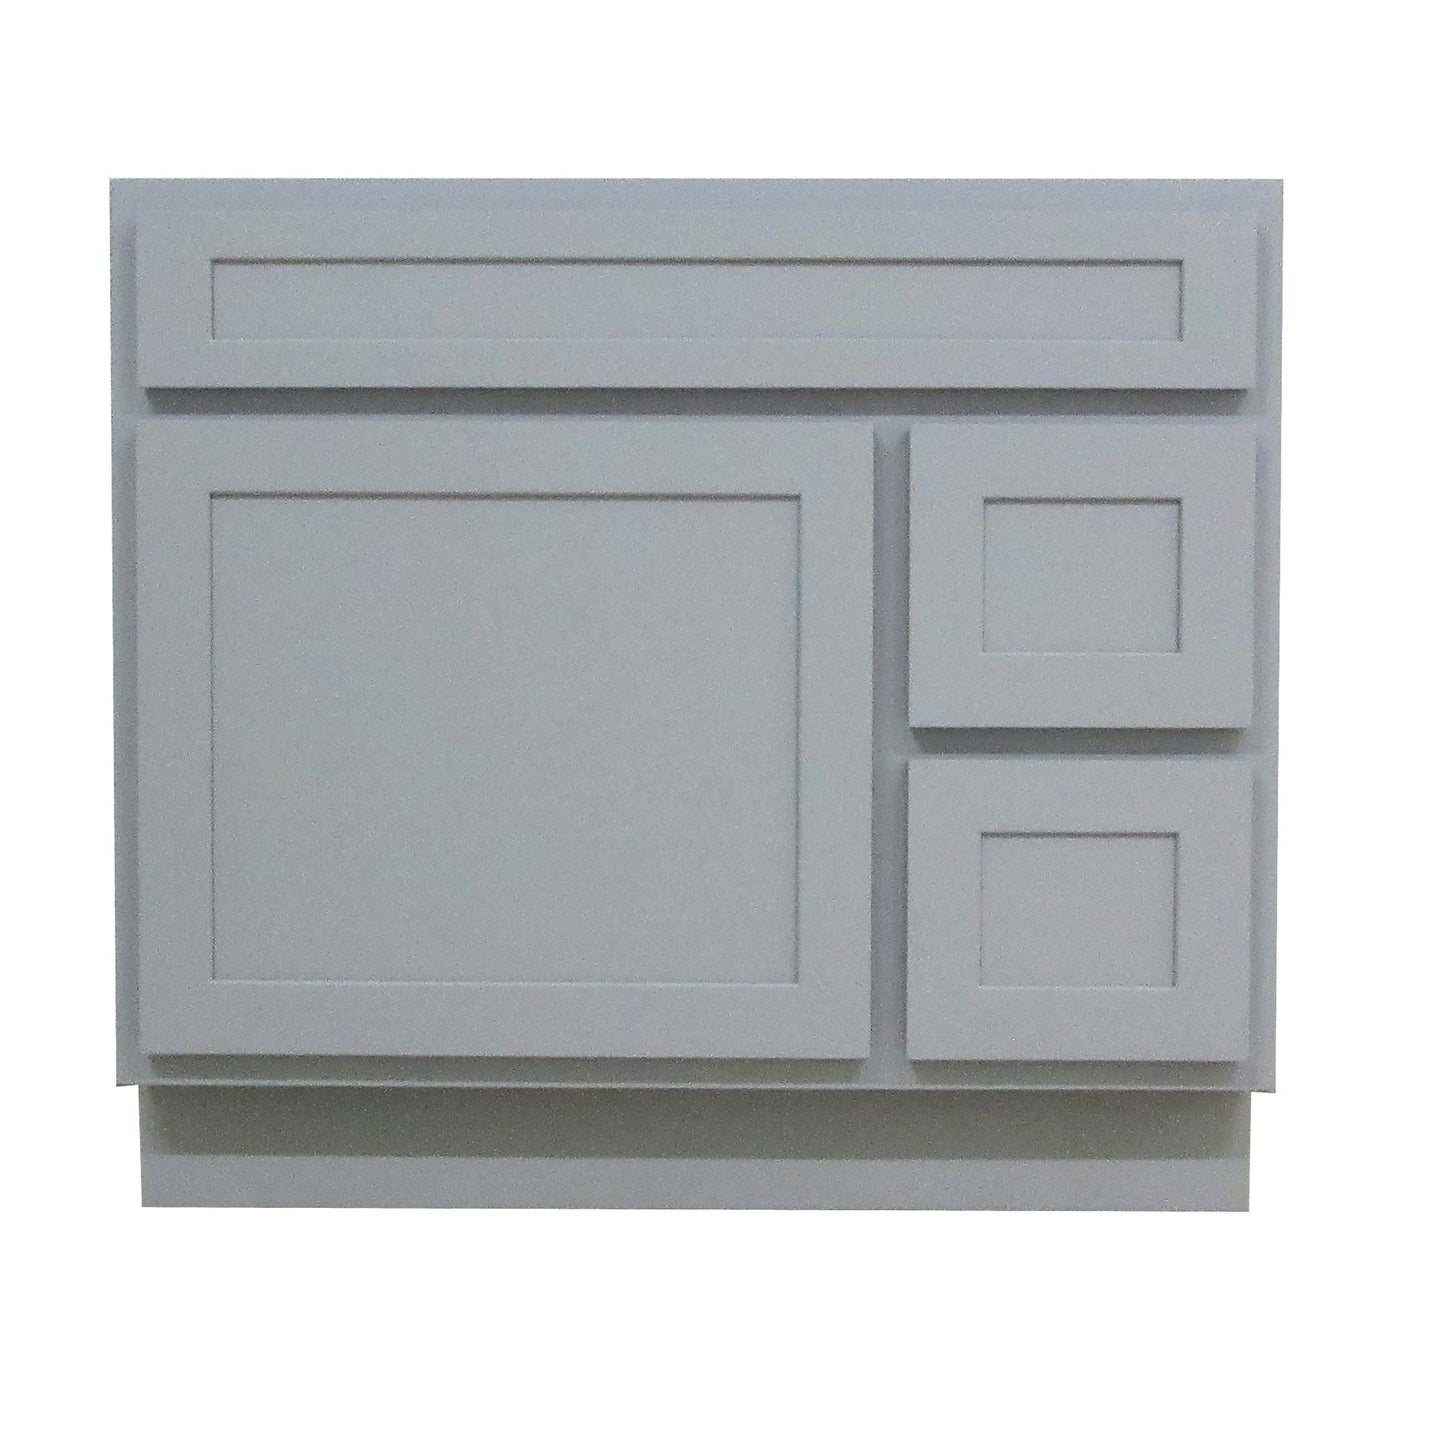 Vanity Art 36" Gray Freestanding Solid Wood Vanity Cabinet With Single Soft Closing Door and 2 Right Drawers